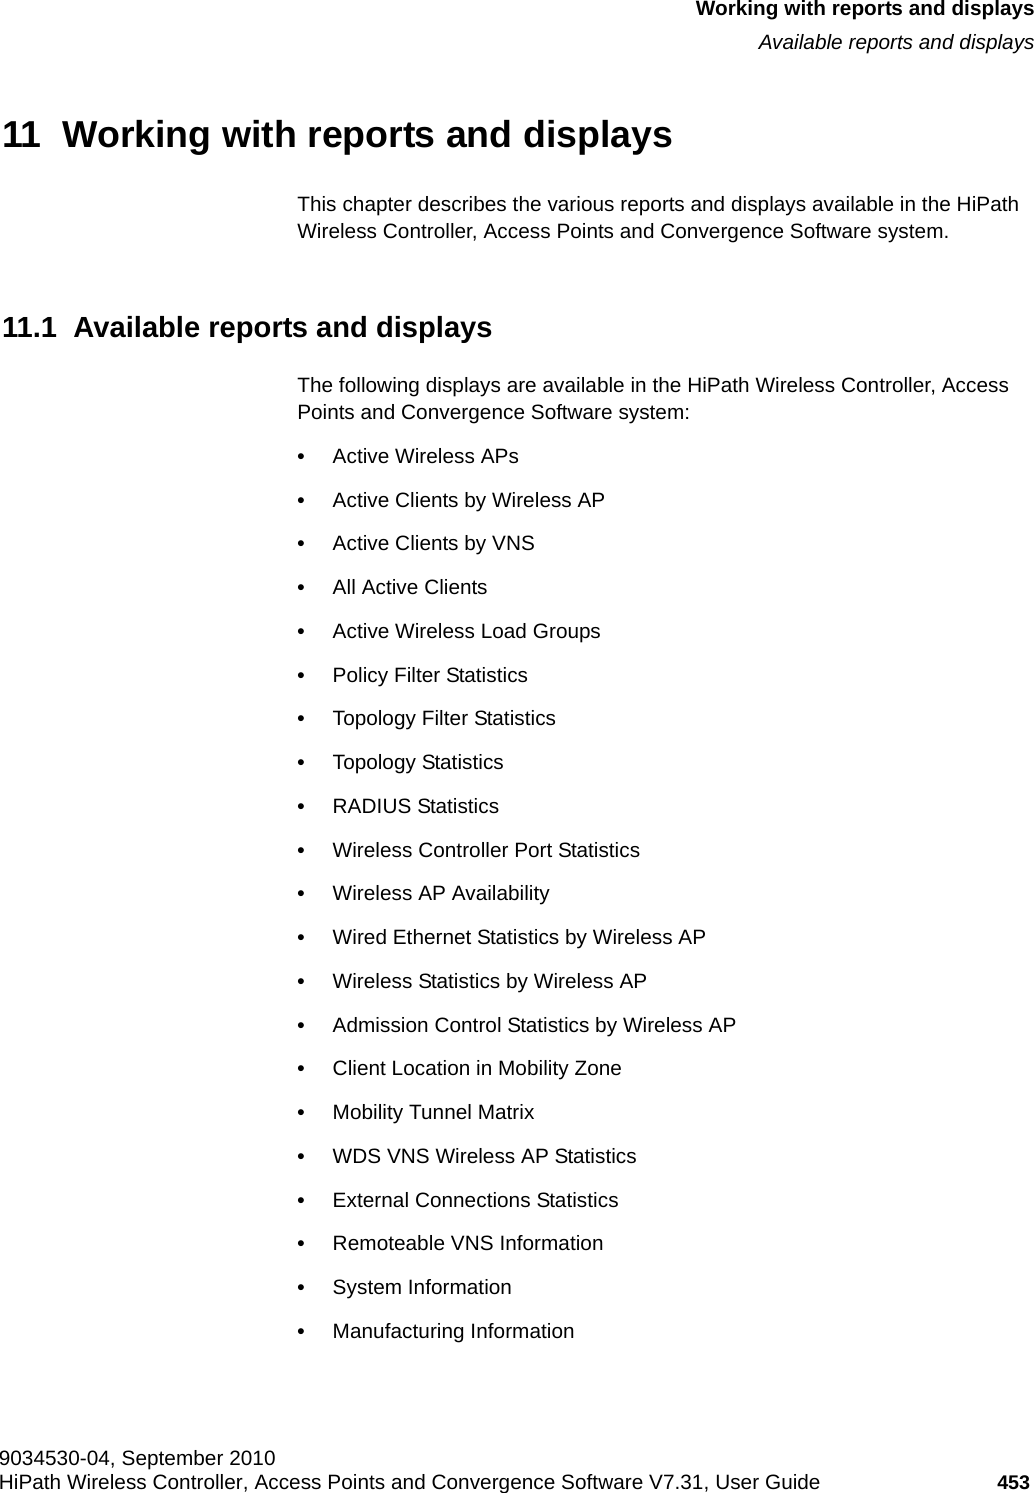 hwc_reports.fm9034530-04, September 2010HiPath Wireless Controller, Access Points and Convergence Software V7.31, User Guide 453      Working with reports and displaysAvailable reports and displays11  Working with reports and displaysThis chapter describes the various reports and displays available in the HiPath Wireless Controller, Access Points and Convergence Software system.11.1  Available reports and displaysThe following displays are available in the HiPath Wireless Controller, Access Points and Convergence Software system:•Active Wireless APs•Active Clients by Wireless AP•Active Clients by VNS•All Active Clients•Active Wireless Load Groups•Policy Filter Statistics•Topology Filter Statistics•Topology Statistics•RADIUS Statistics•Wireless Controller Port Statistics•Wireless AP Availability•Wired Ethernet Statistics by Wireless AP•Wireless Statistics by Wireless AP•Admission Control Statistics by Wireless AP •Client Location in Mobility Zone•Mobility Tunnel Matrix•WDS VNS Wireless AP Statistics•External Connections Statistics•Remoteable VNS Information•System Information•Manufacturing Information